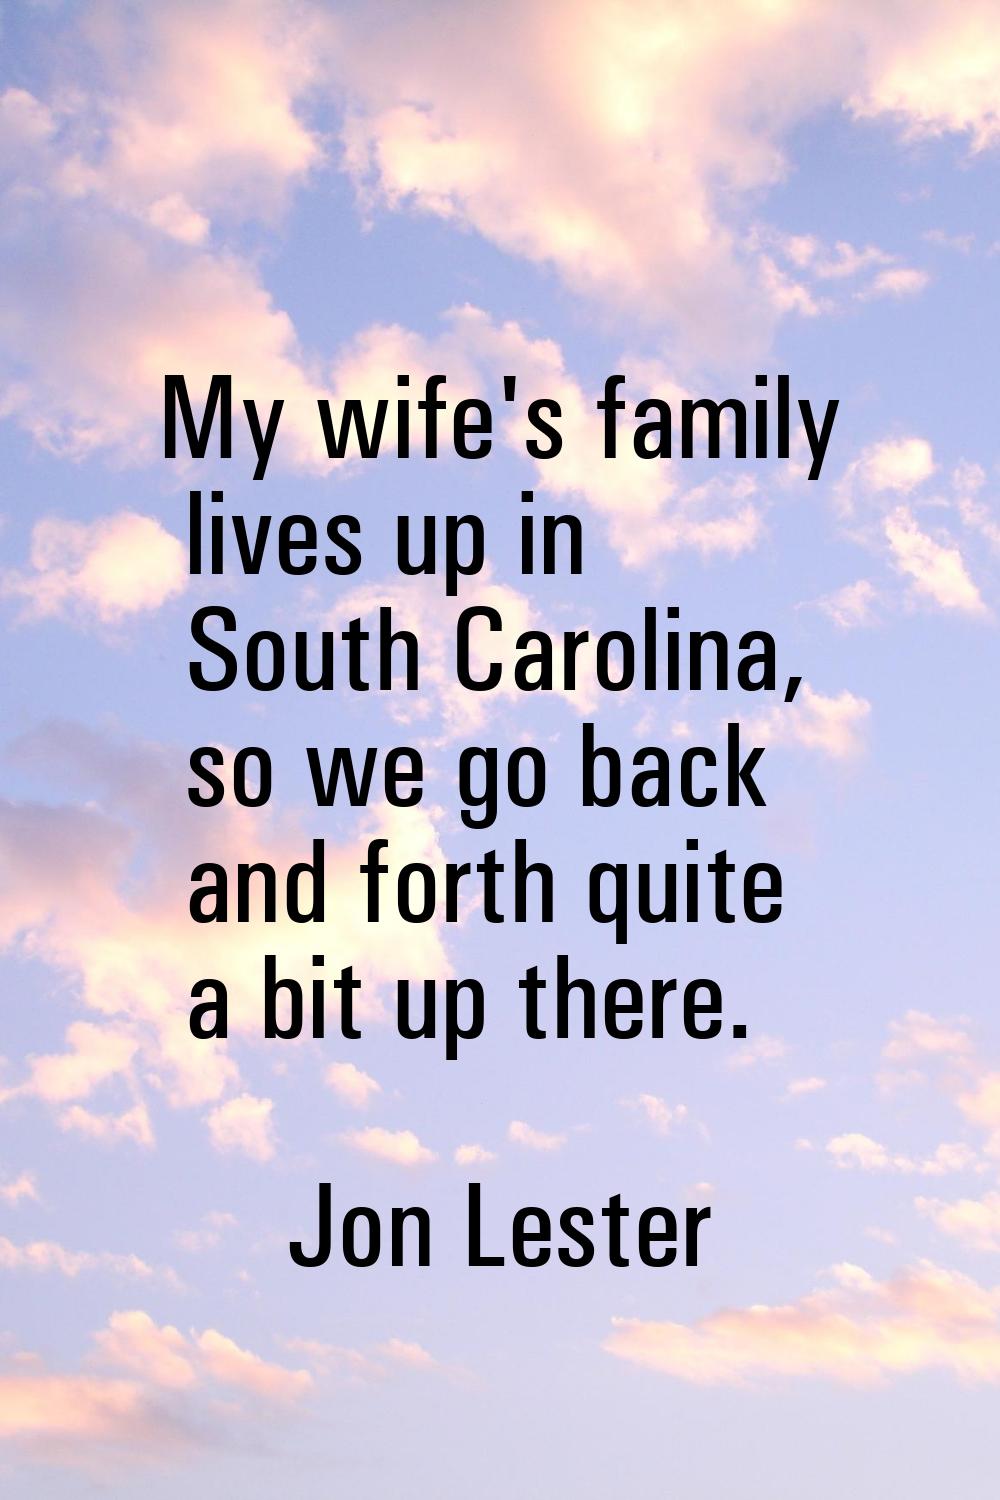 My wife's family lives up in South Carolina, so we go back and forth quite a bit up there.